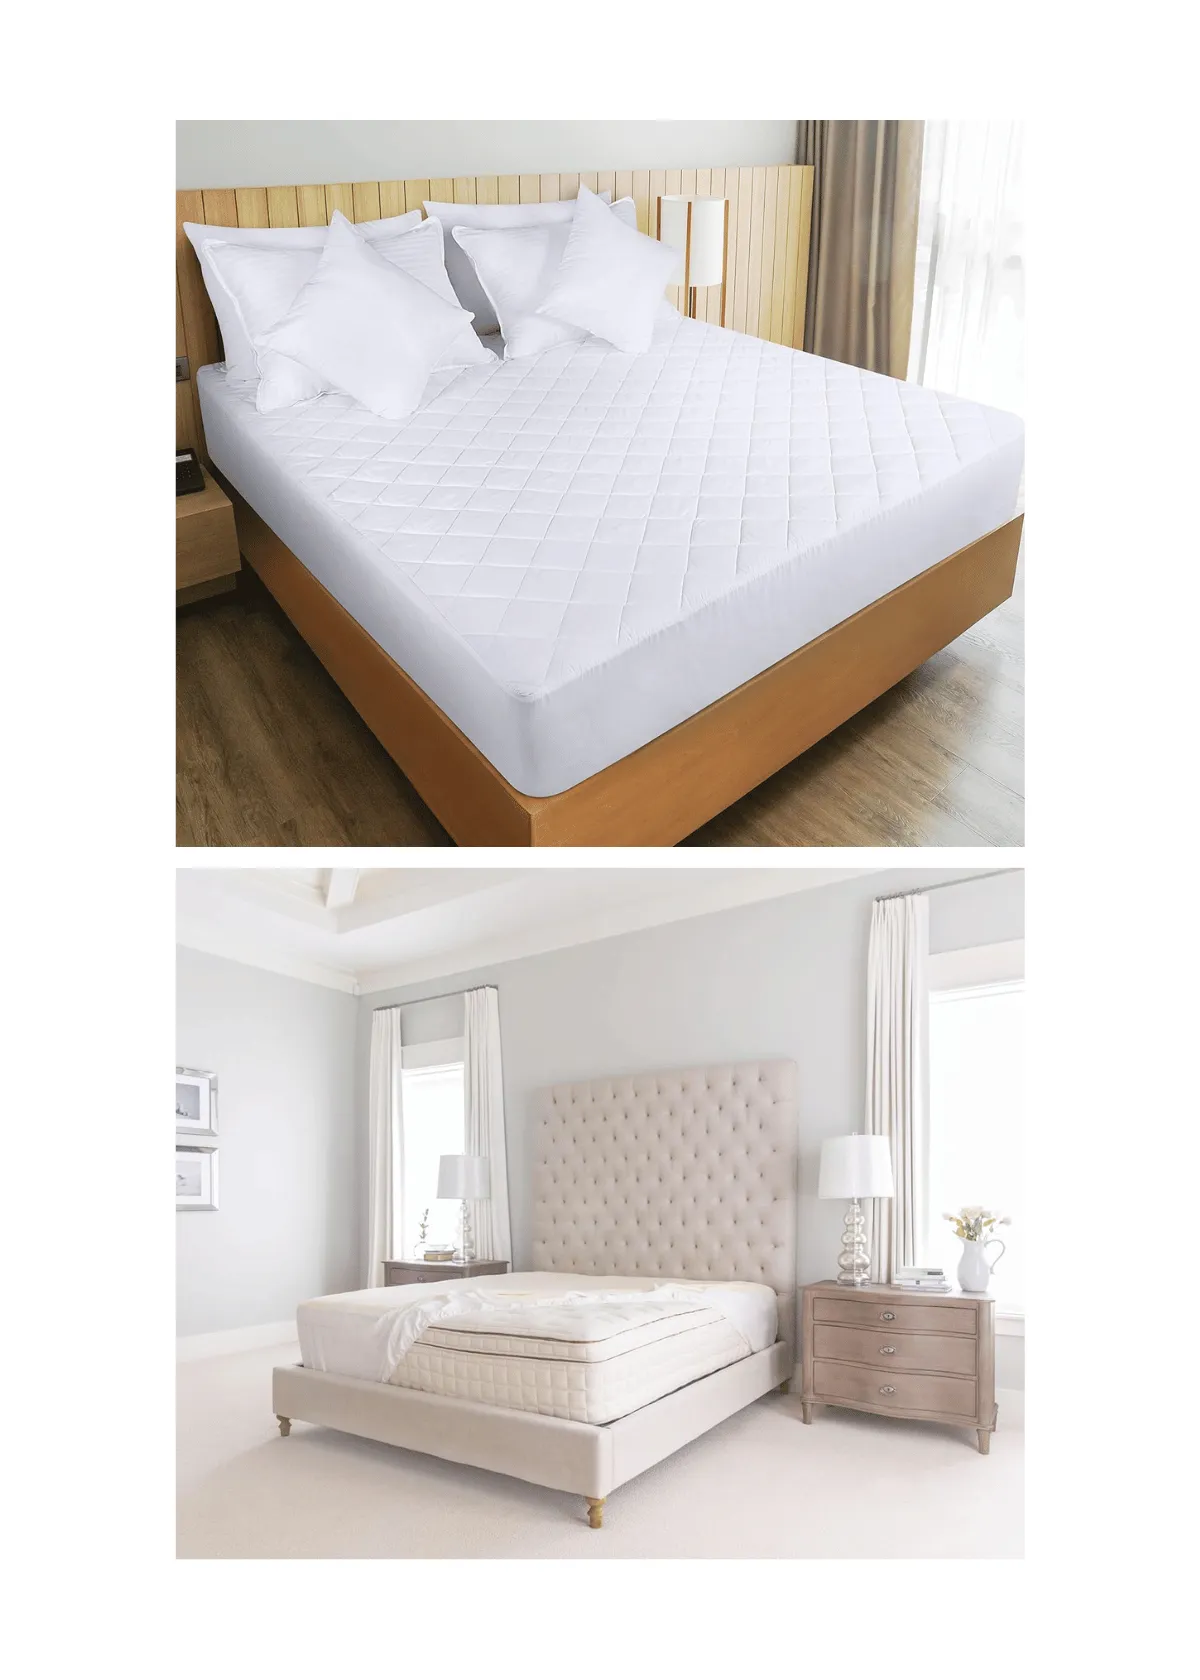 "Discovering the Best Mattress Padding Options for Deep Sleep"